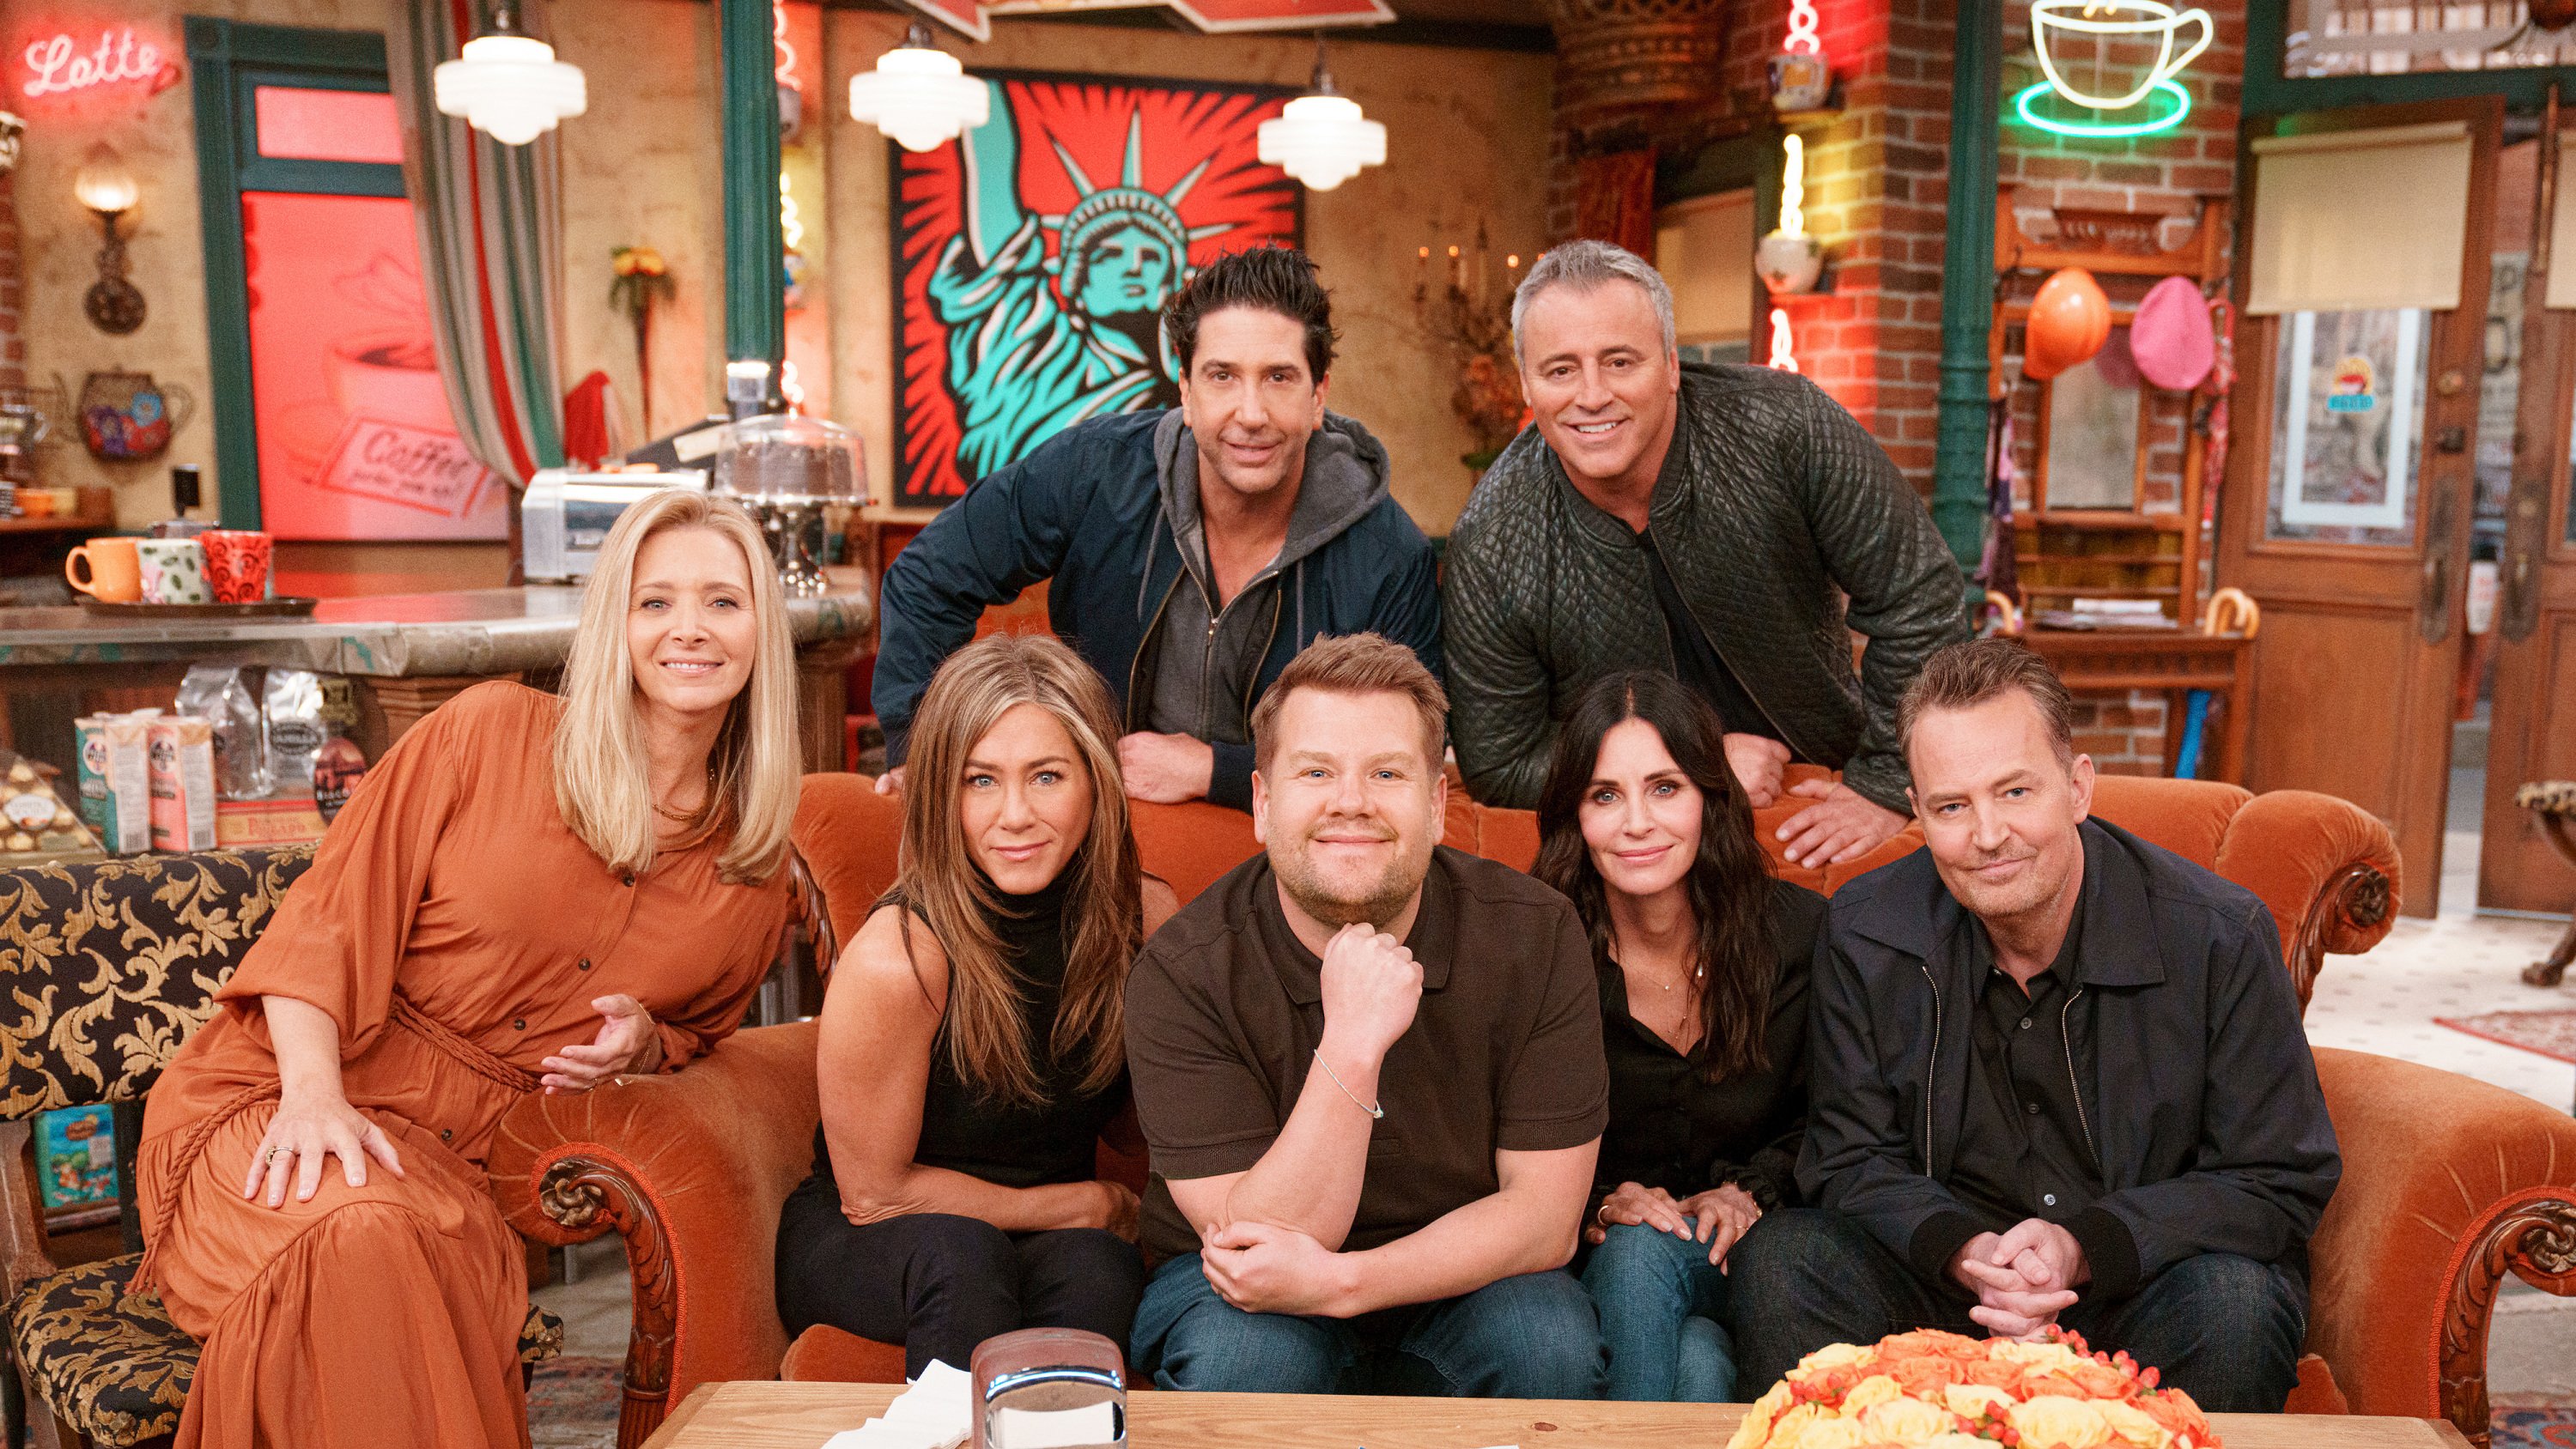 Lisa Kudrow, Jennifer Aniston, Courteney Cox, David Schwimmer, Matt LeBlanc, and Matthew Perry join James Corden for a Friends Reunion Special during "The Late Late Show with James Corden" | Photo: Terence Patrick/CBS via Getty Images